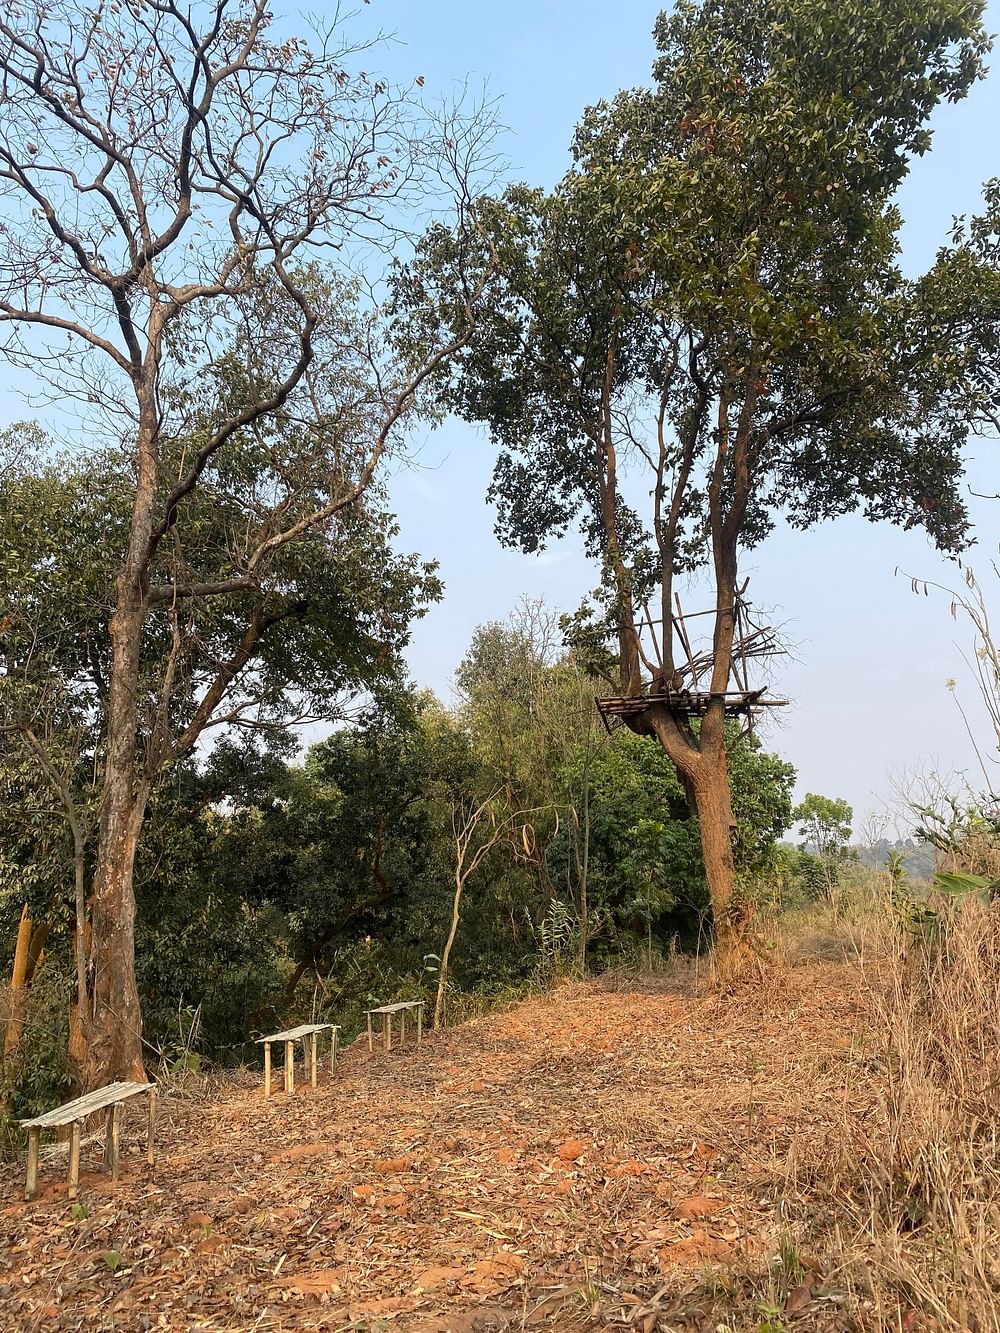 The elephant trail inside the Farm Learning Centre, where elephants come to feed on bamboo planted by the green commandos | Gitanjali Das | ThePrint